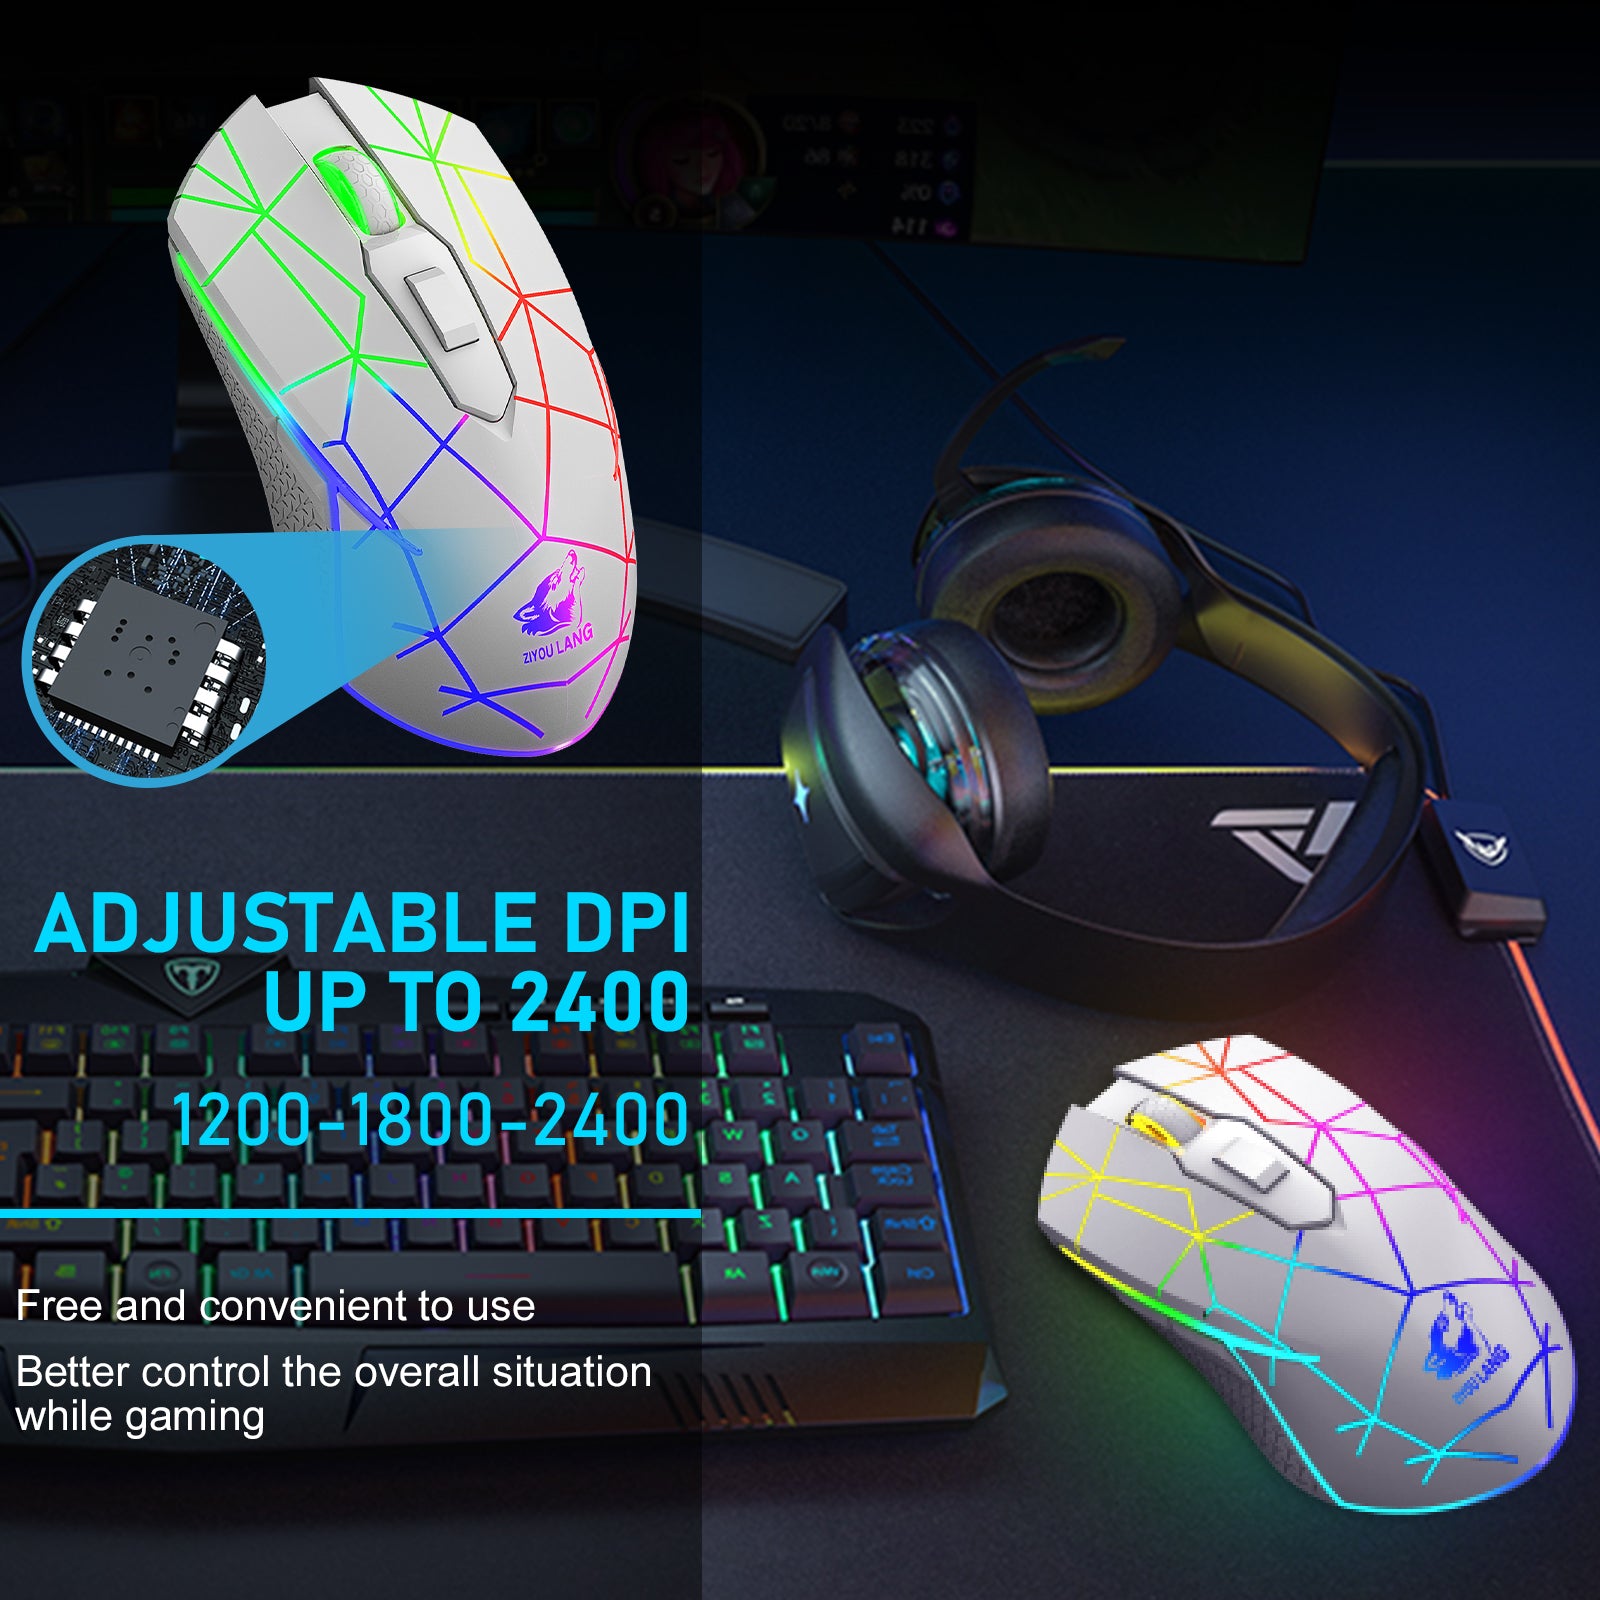 ZIYOU LANG Wireless Gaming Mouse with 2.4Ghz USB Receiver RGB Backlight Adjustable DPI Silent Rechargeable Ergonomic 7 Button